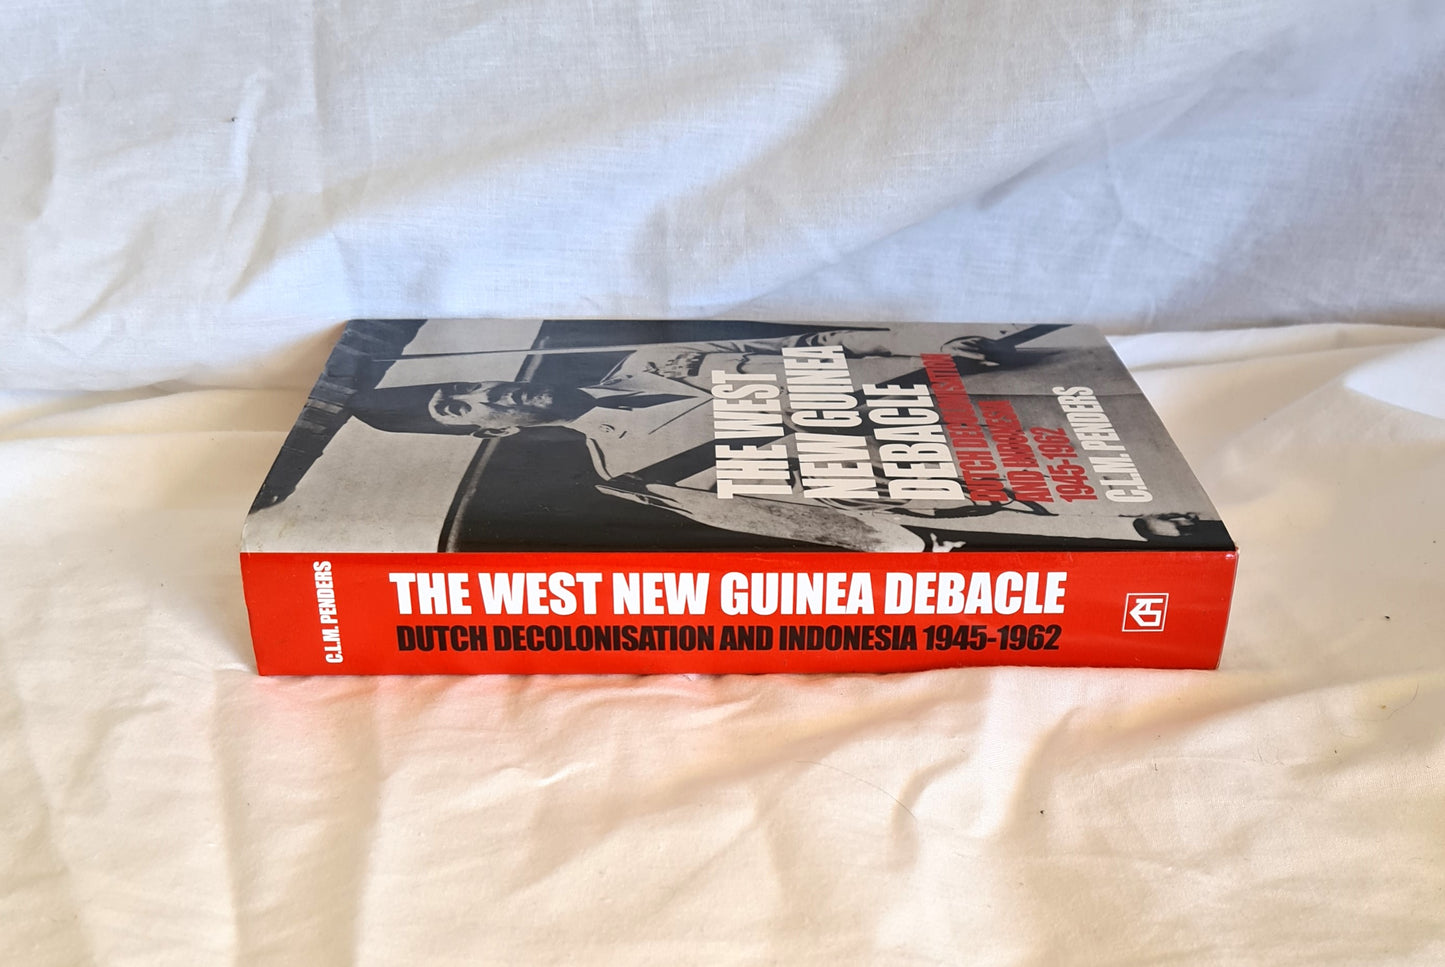 The West New Guinea Debacle by C. L. M. Penders